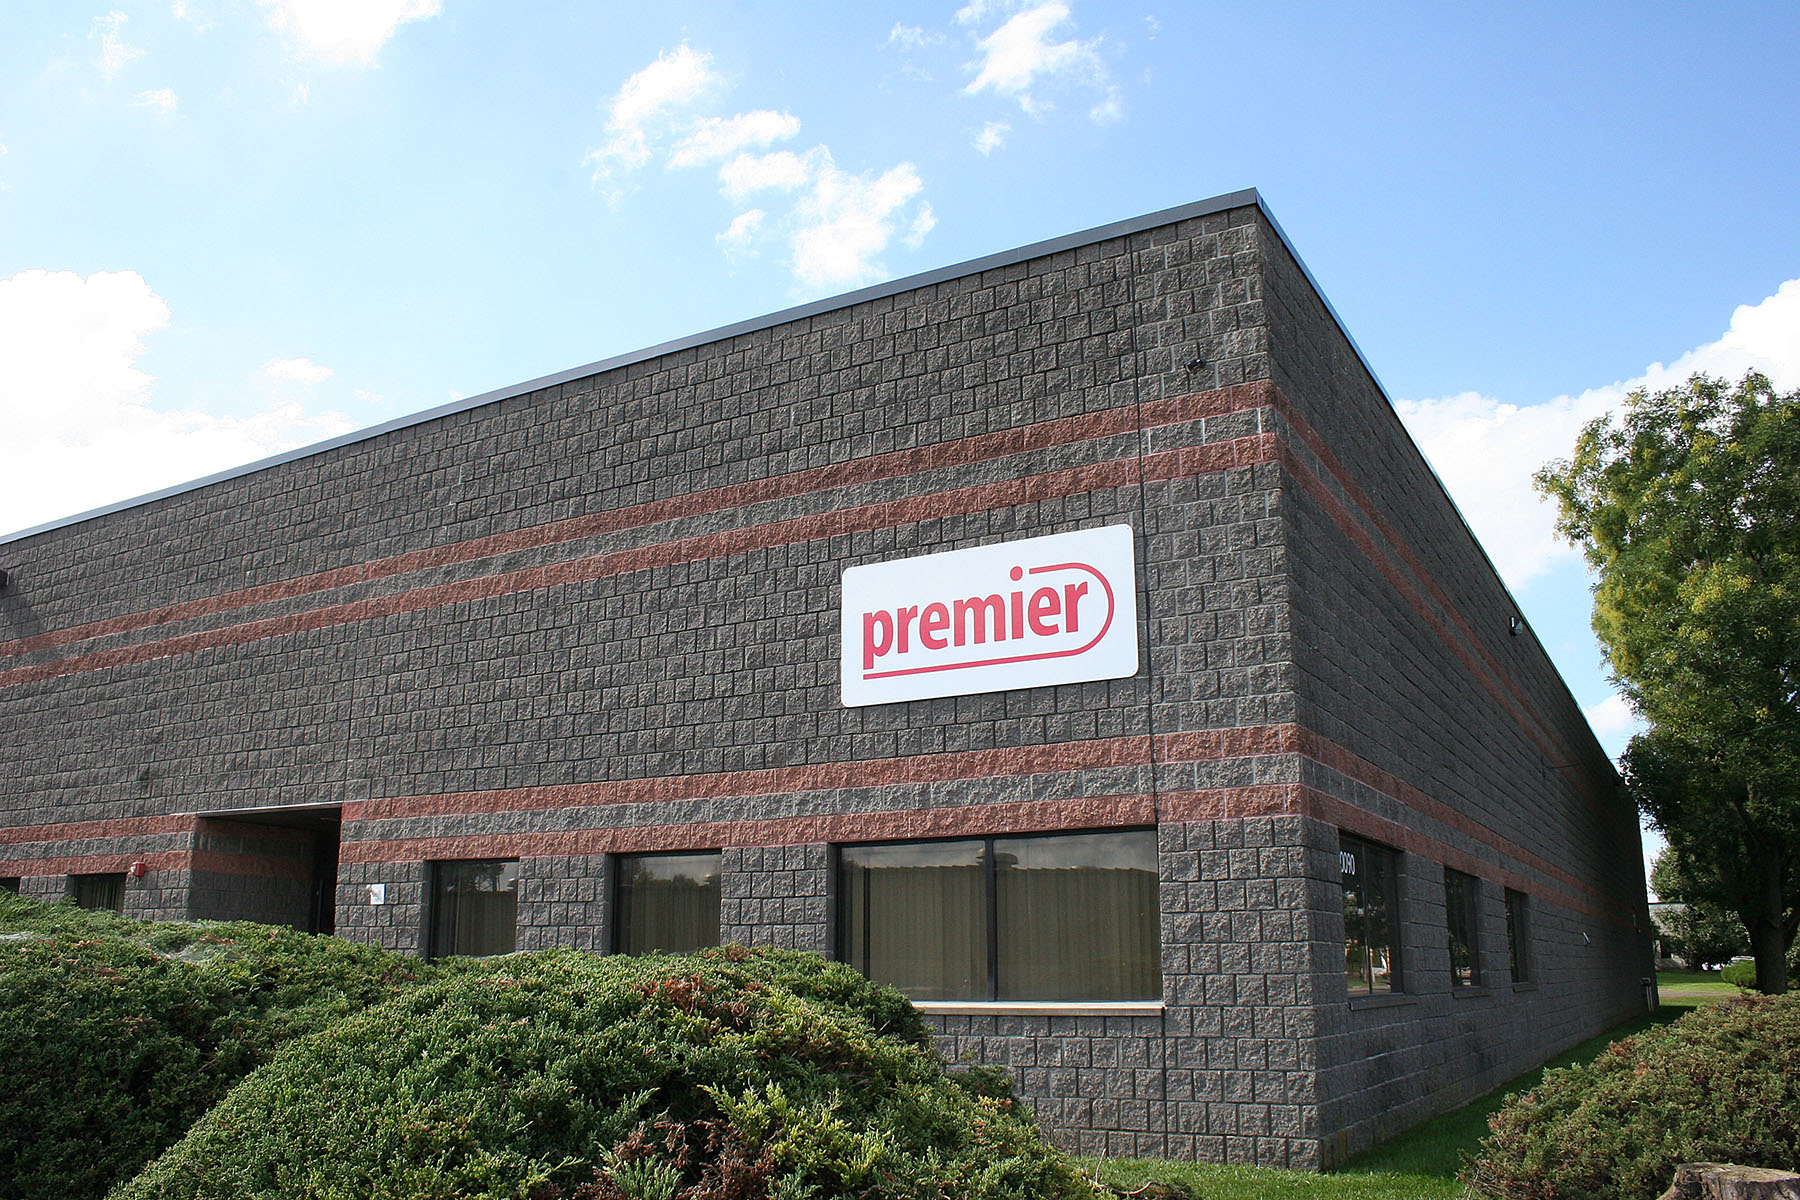 Premier Medical Manufacturing facility in Philadelphia, PA